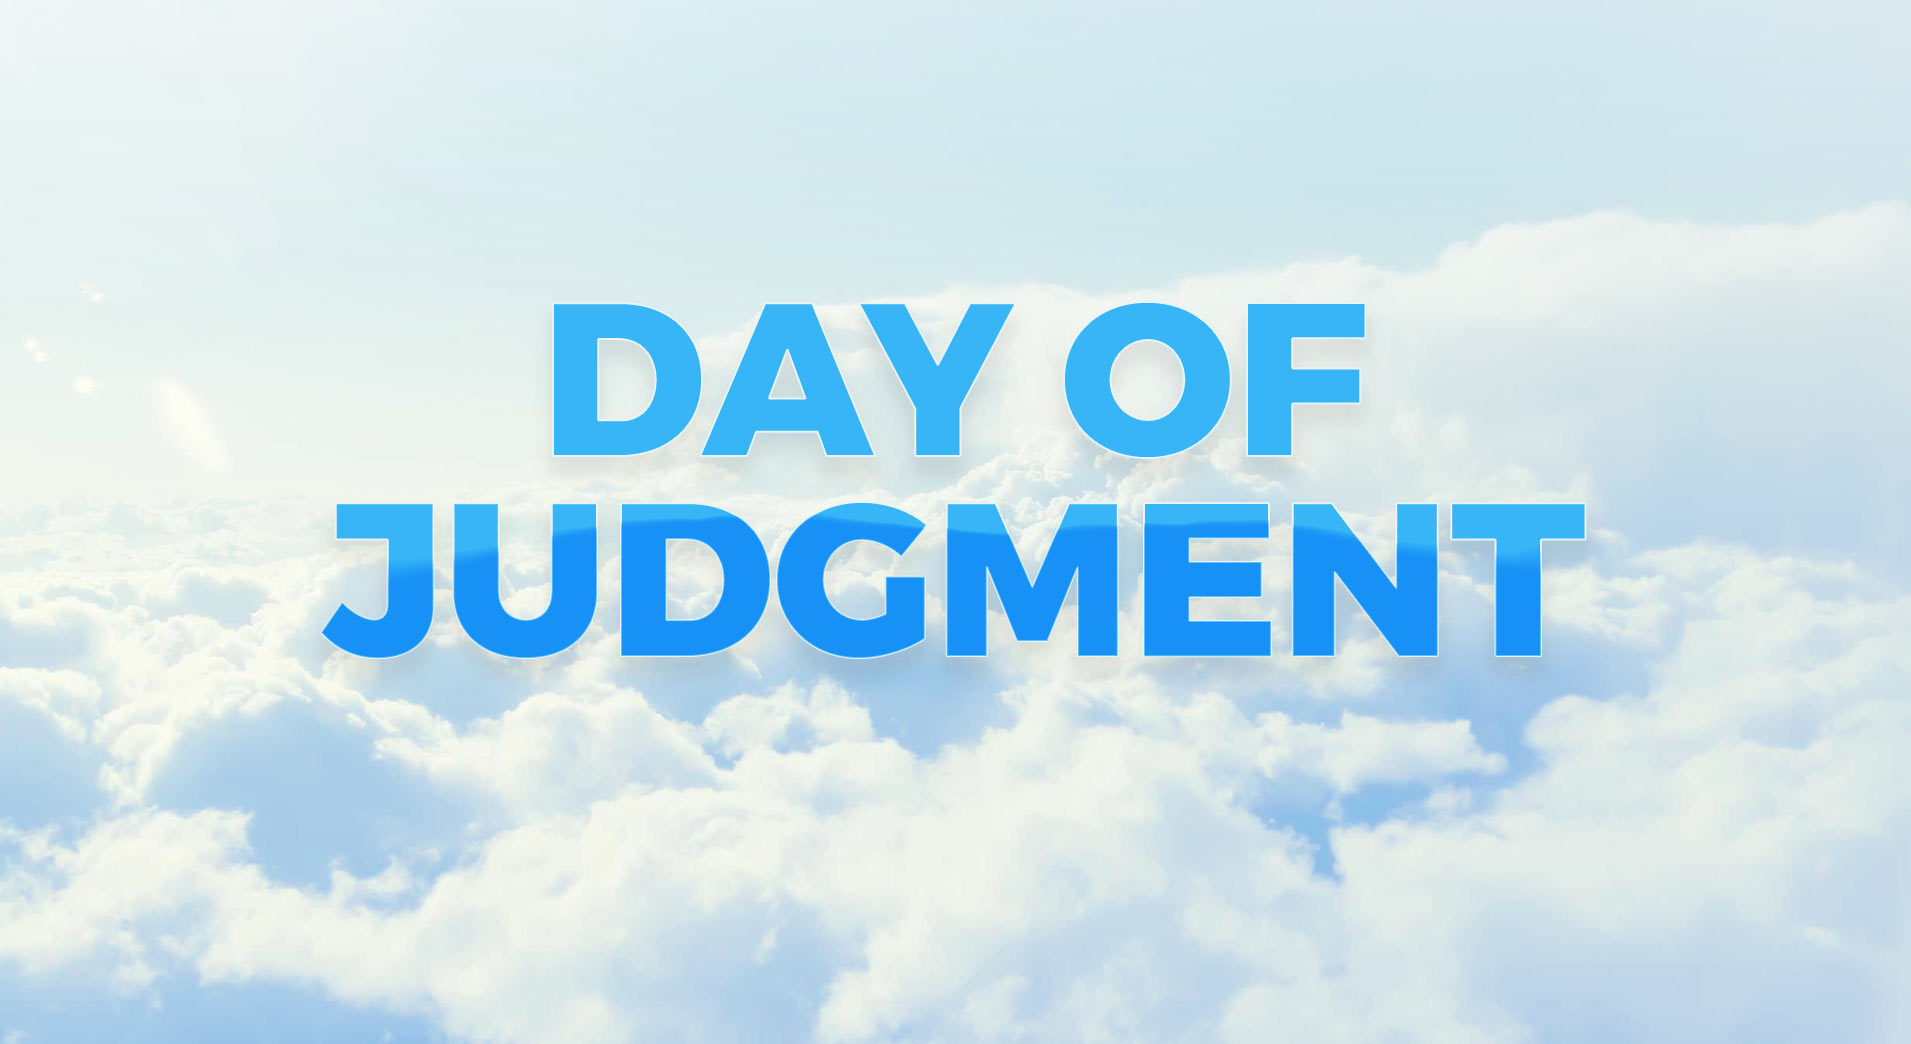 DAY-OF-JUDGMENT